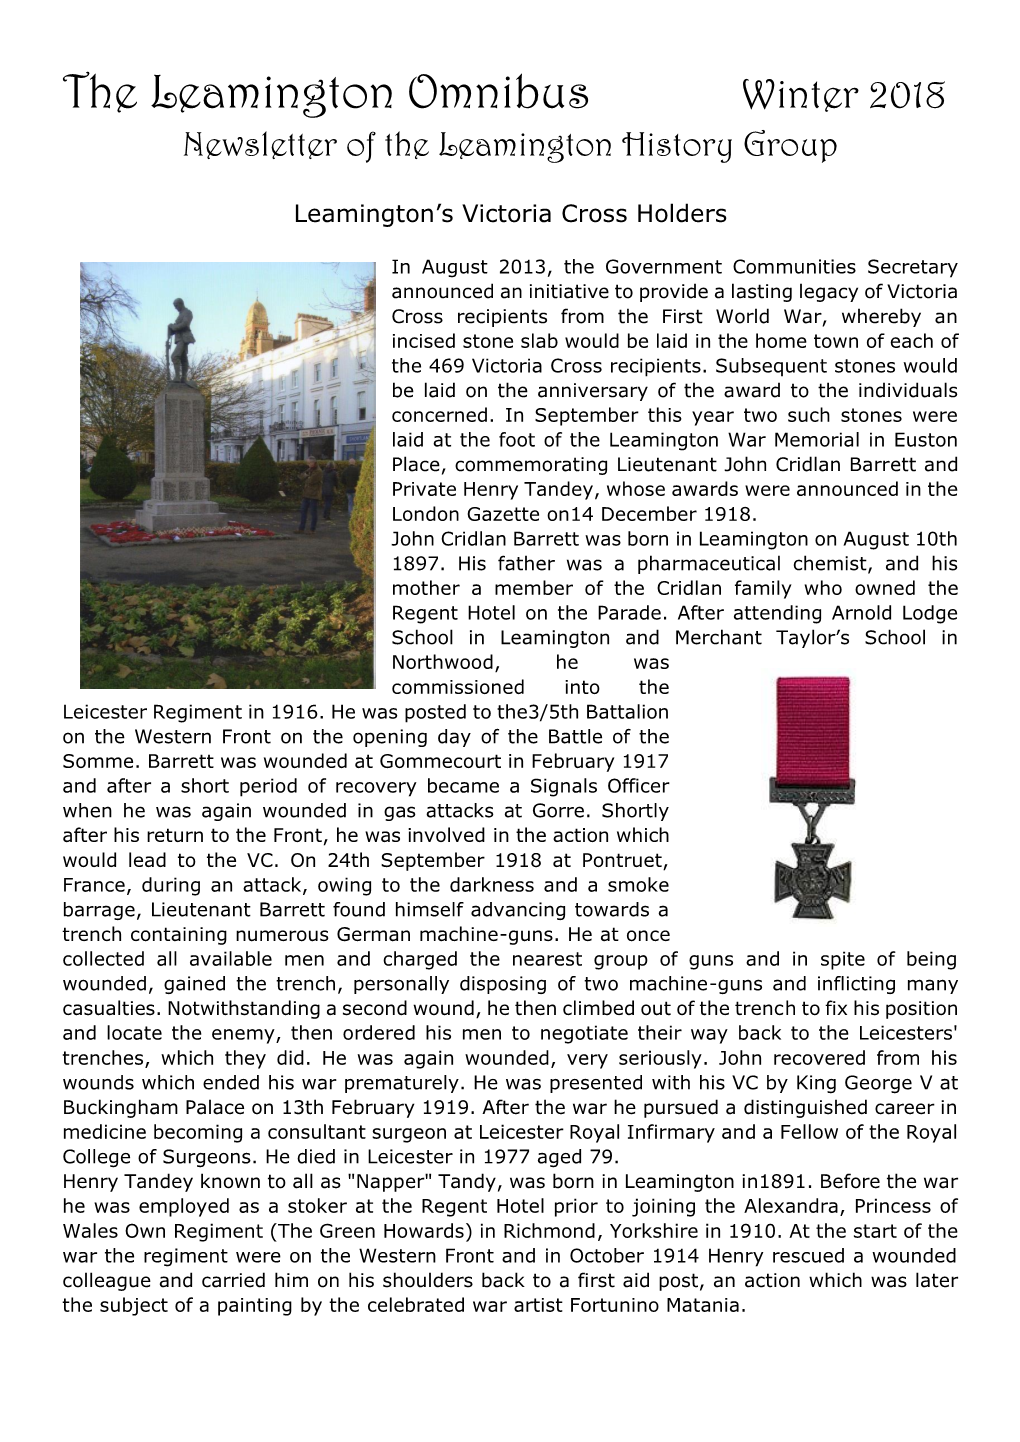 Winter 2018 Newsletter of the Leamington History Group